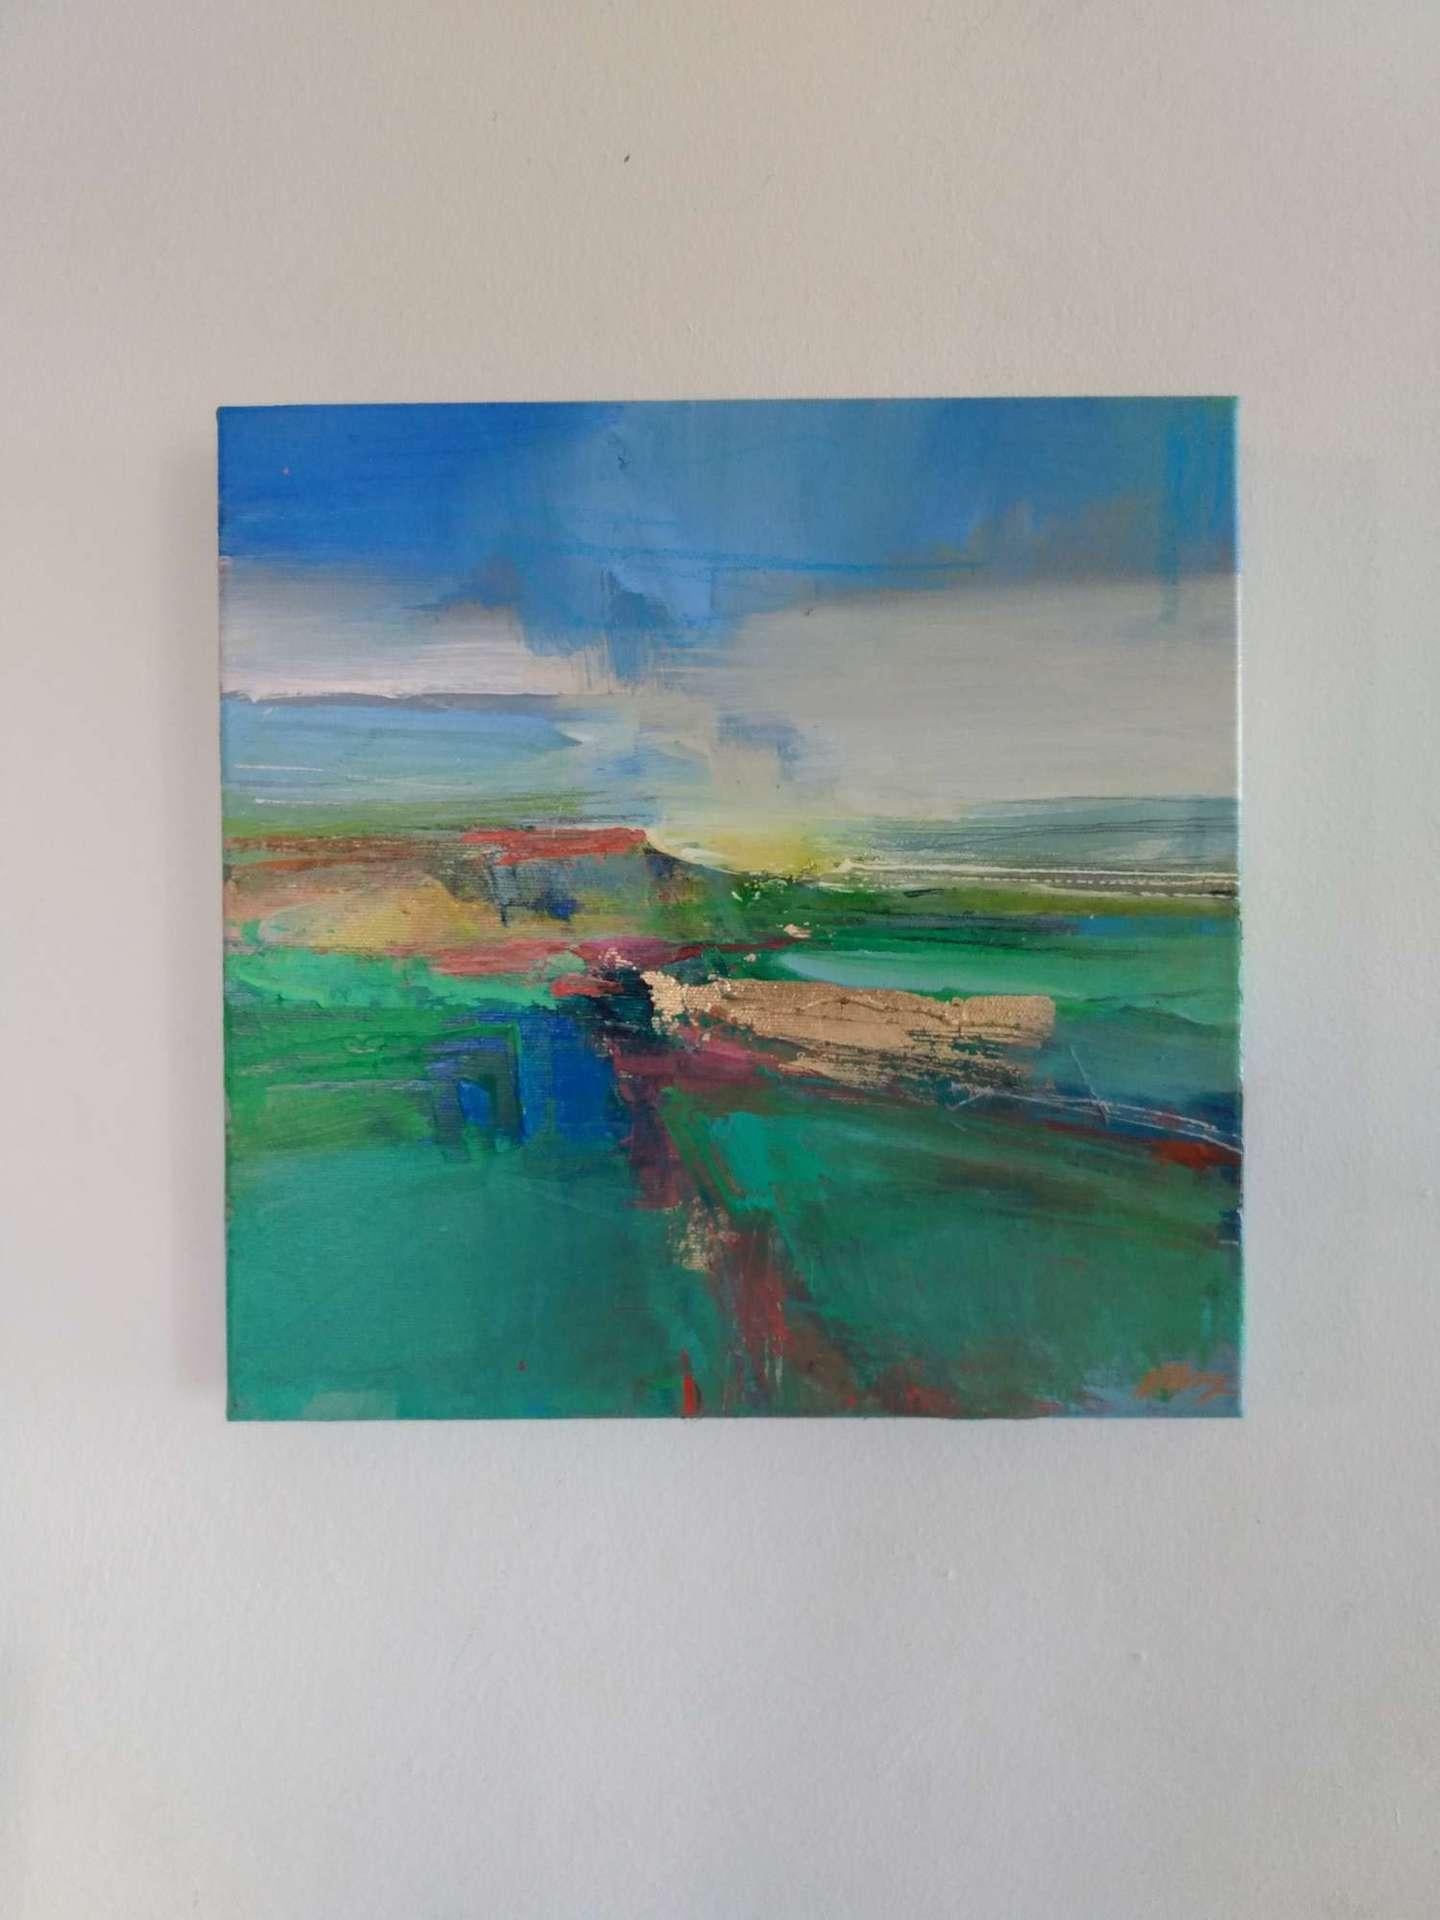 Magdalena Morey
Exploring Every Path 4
Original Cubist Inspired Landscape Painting
Mixed Media on Canvas
Canvas Size: H 30cm x W 30cm x D 3.5cm
Sold Unframed
(Please note that in situ images are purely an indication of how a piece may